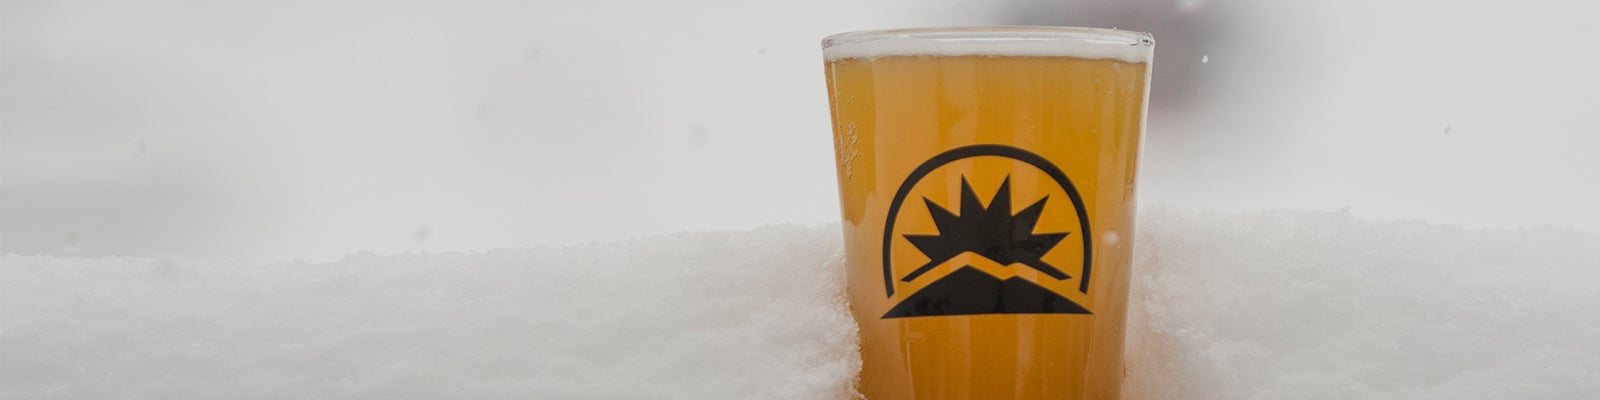 Something special is brewing in Maine (psst, it’s great beer)